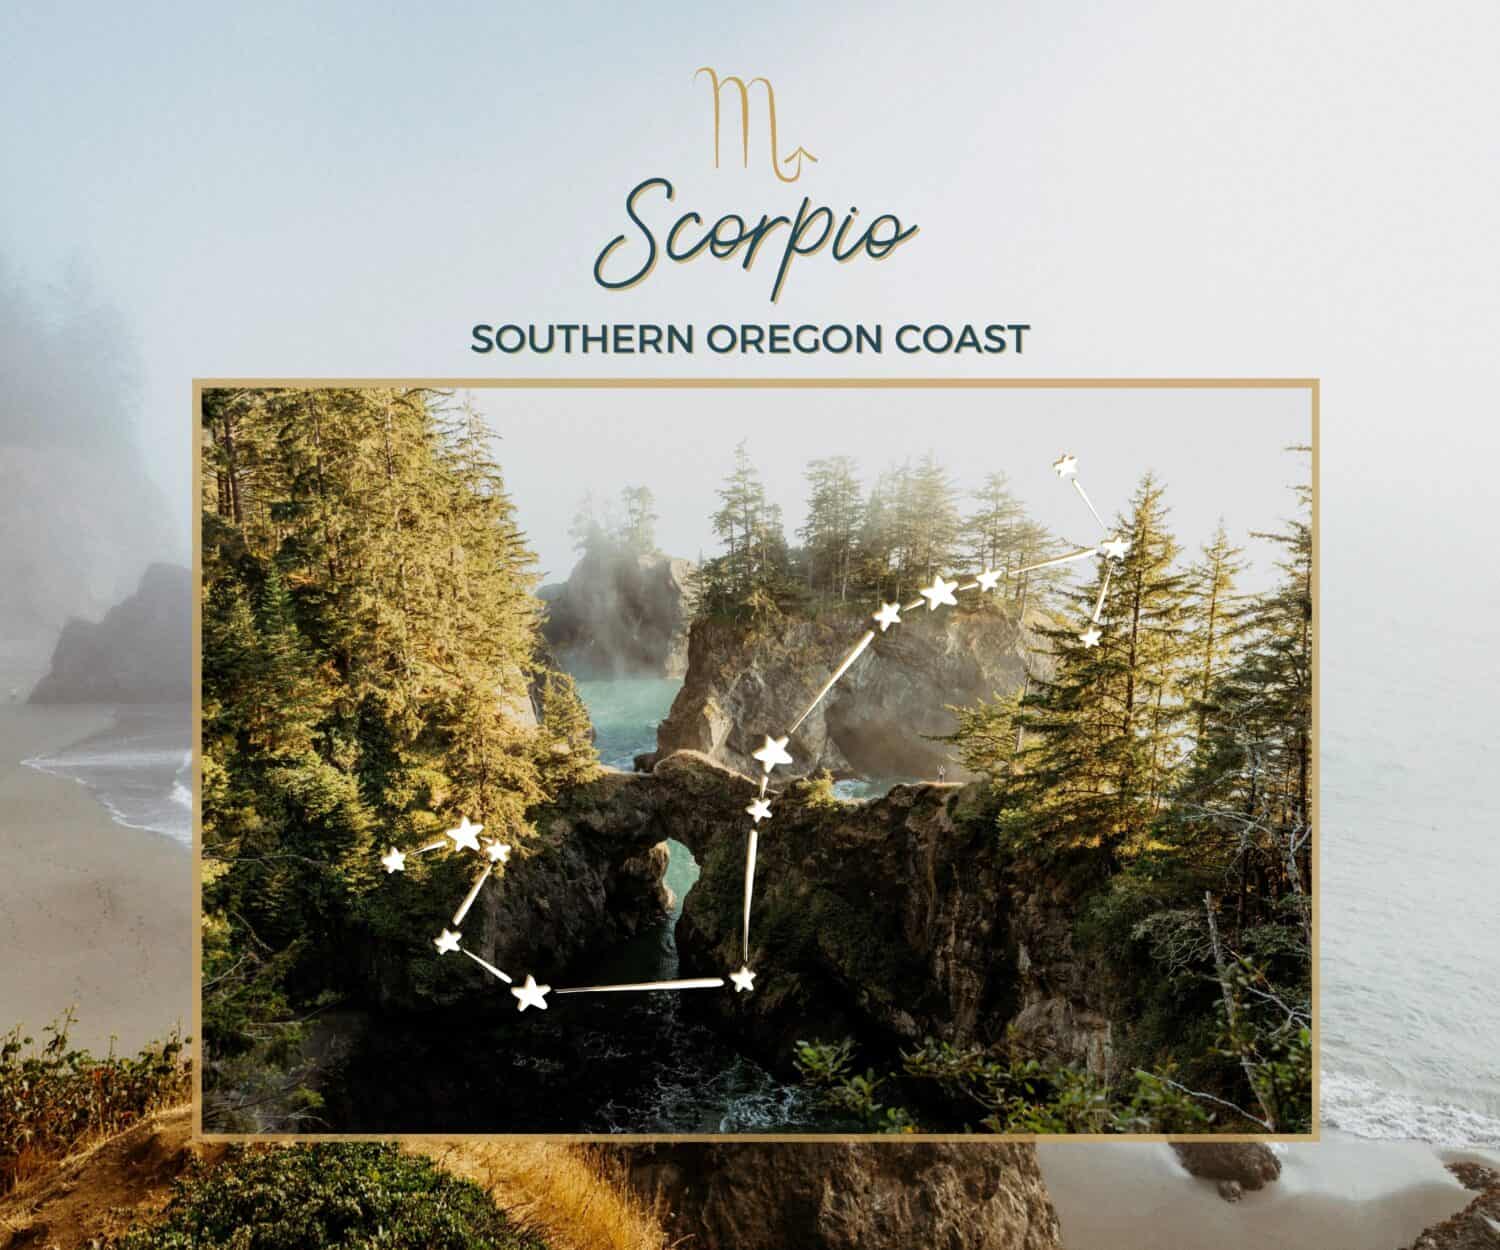 Where To Travel Based On Your Zodiac Sign - Pacific Northwest - Scorpio